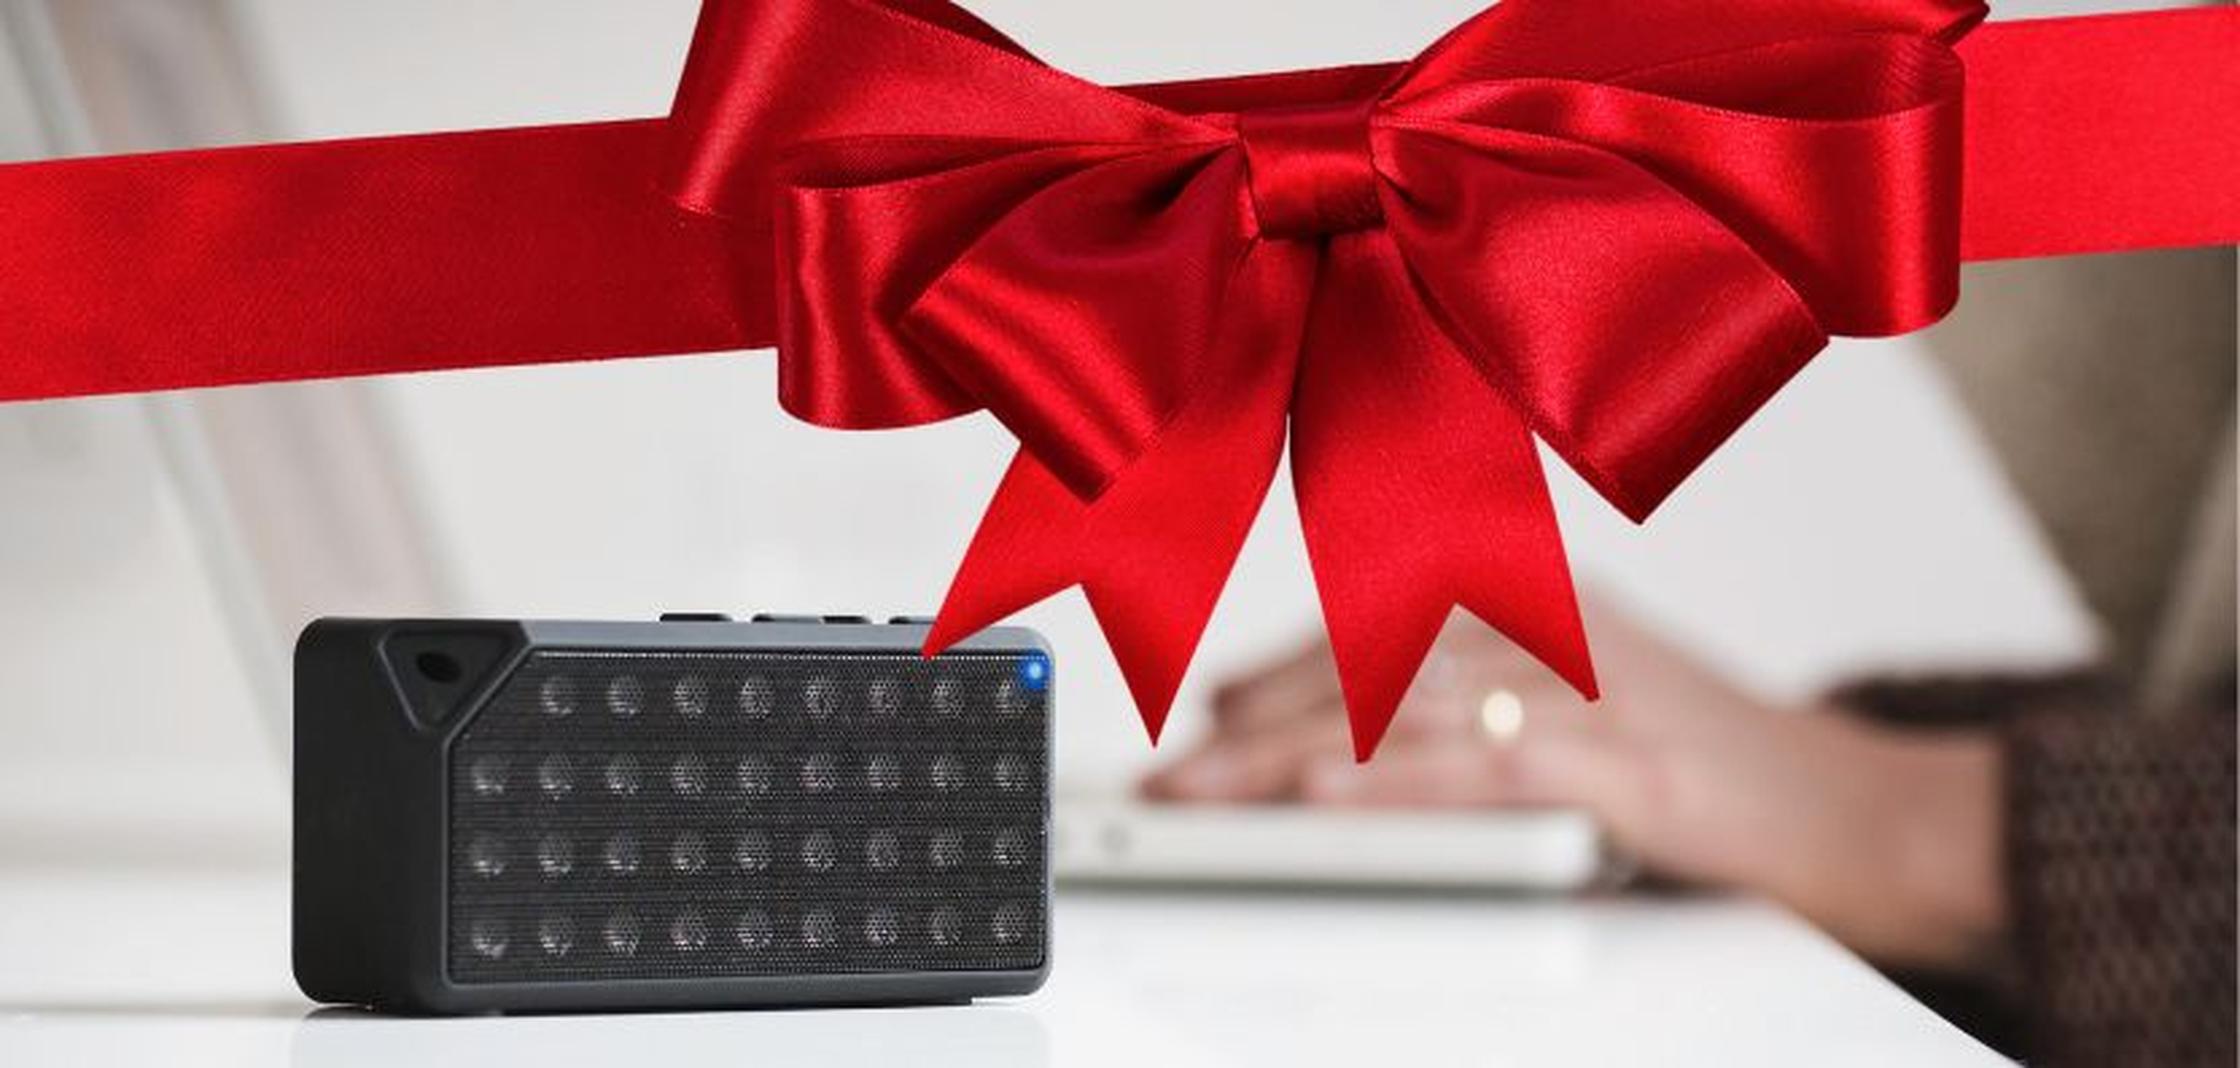 Bluetooth speaker as a Christmas gift for mum